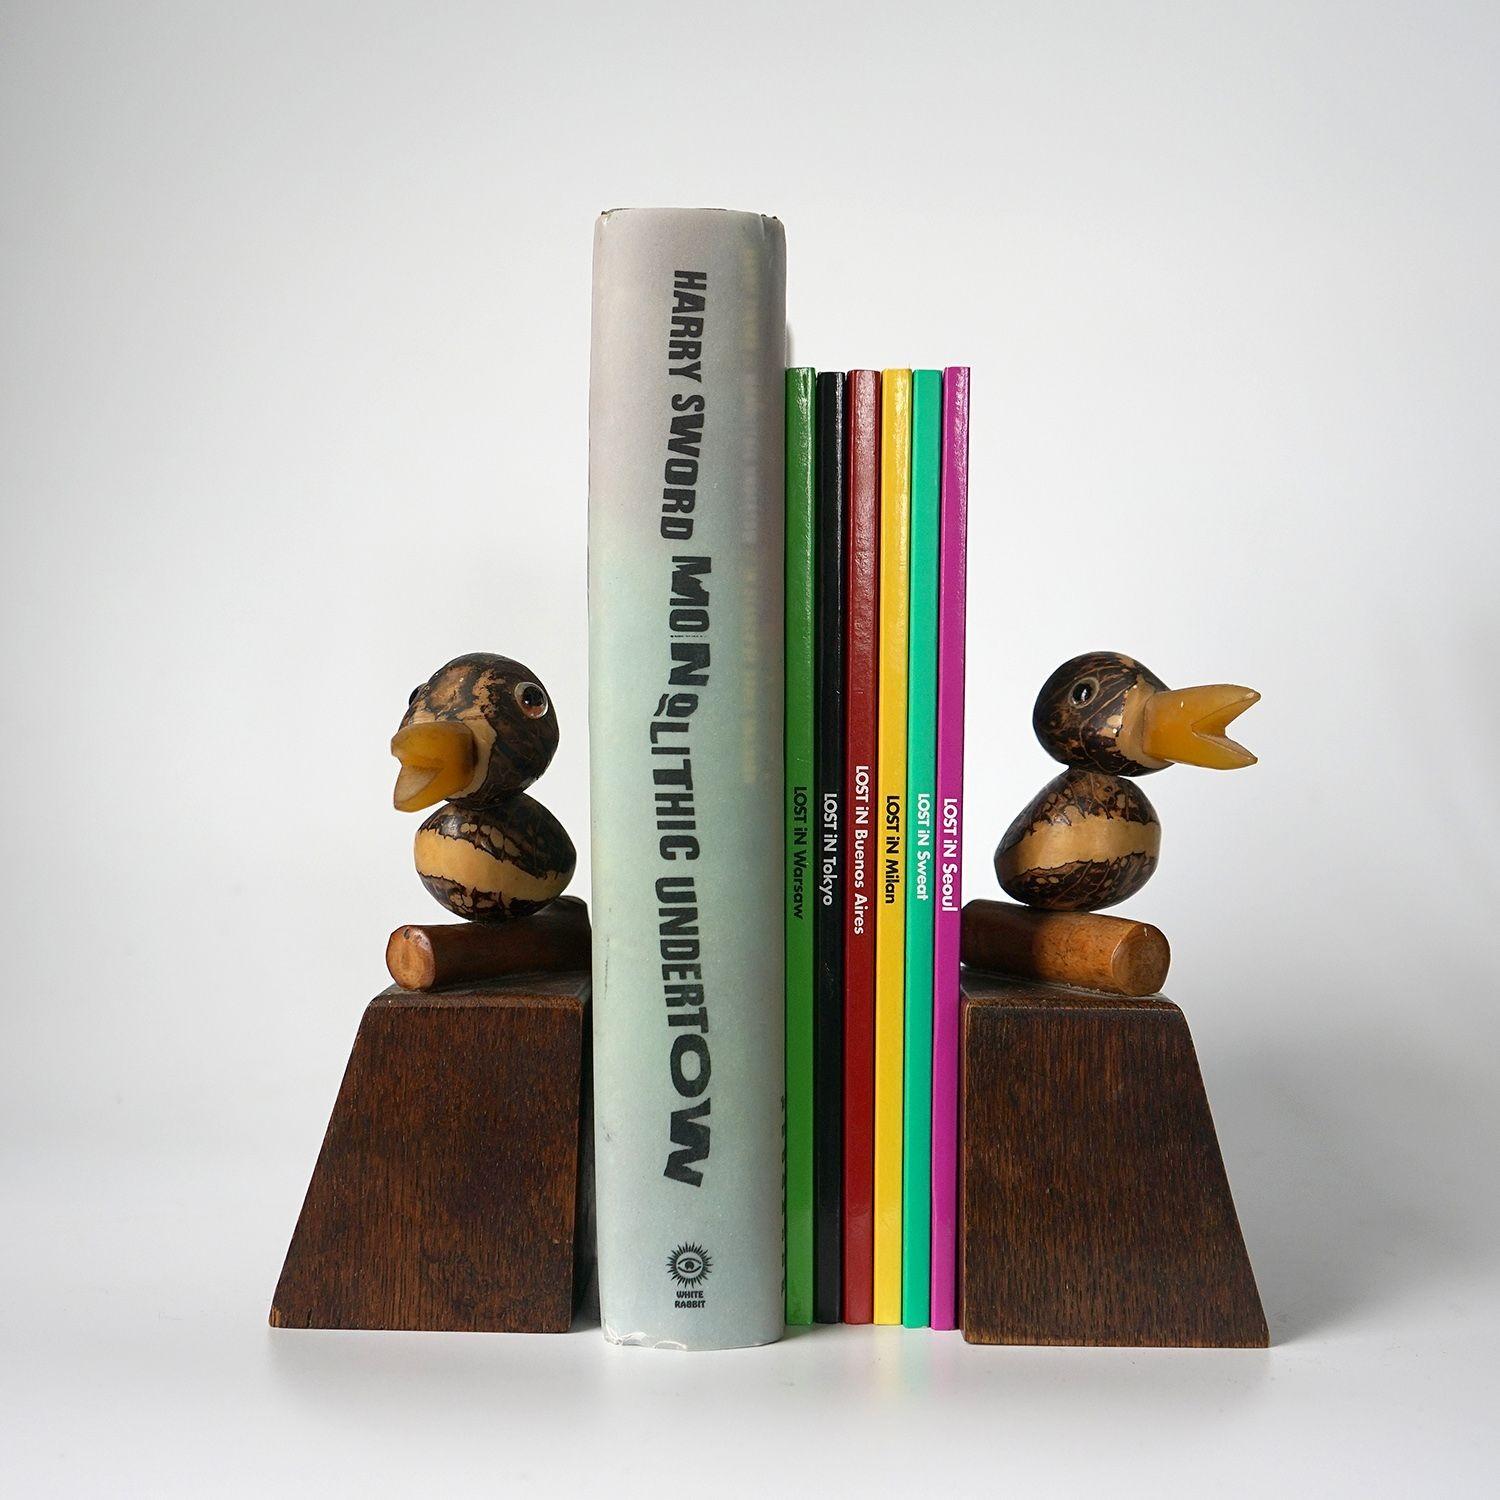 Antique Bakelite wood and Tagua nut novelty bookends
These cheeky little characters are unmarked but almost certainly part of the YZ bird range produced by Henry Howell throughout the 1920s-1930s period, these were mainly retailed through